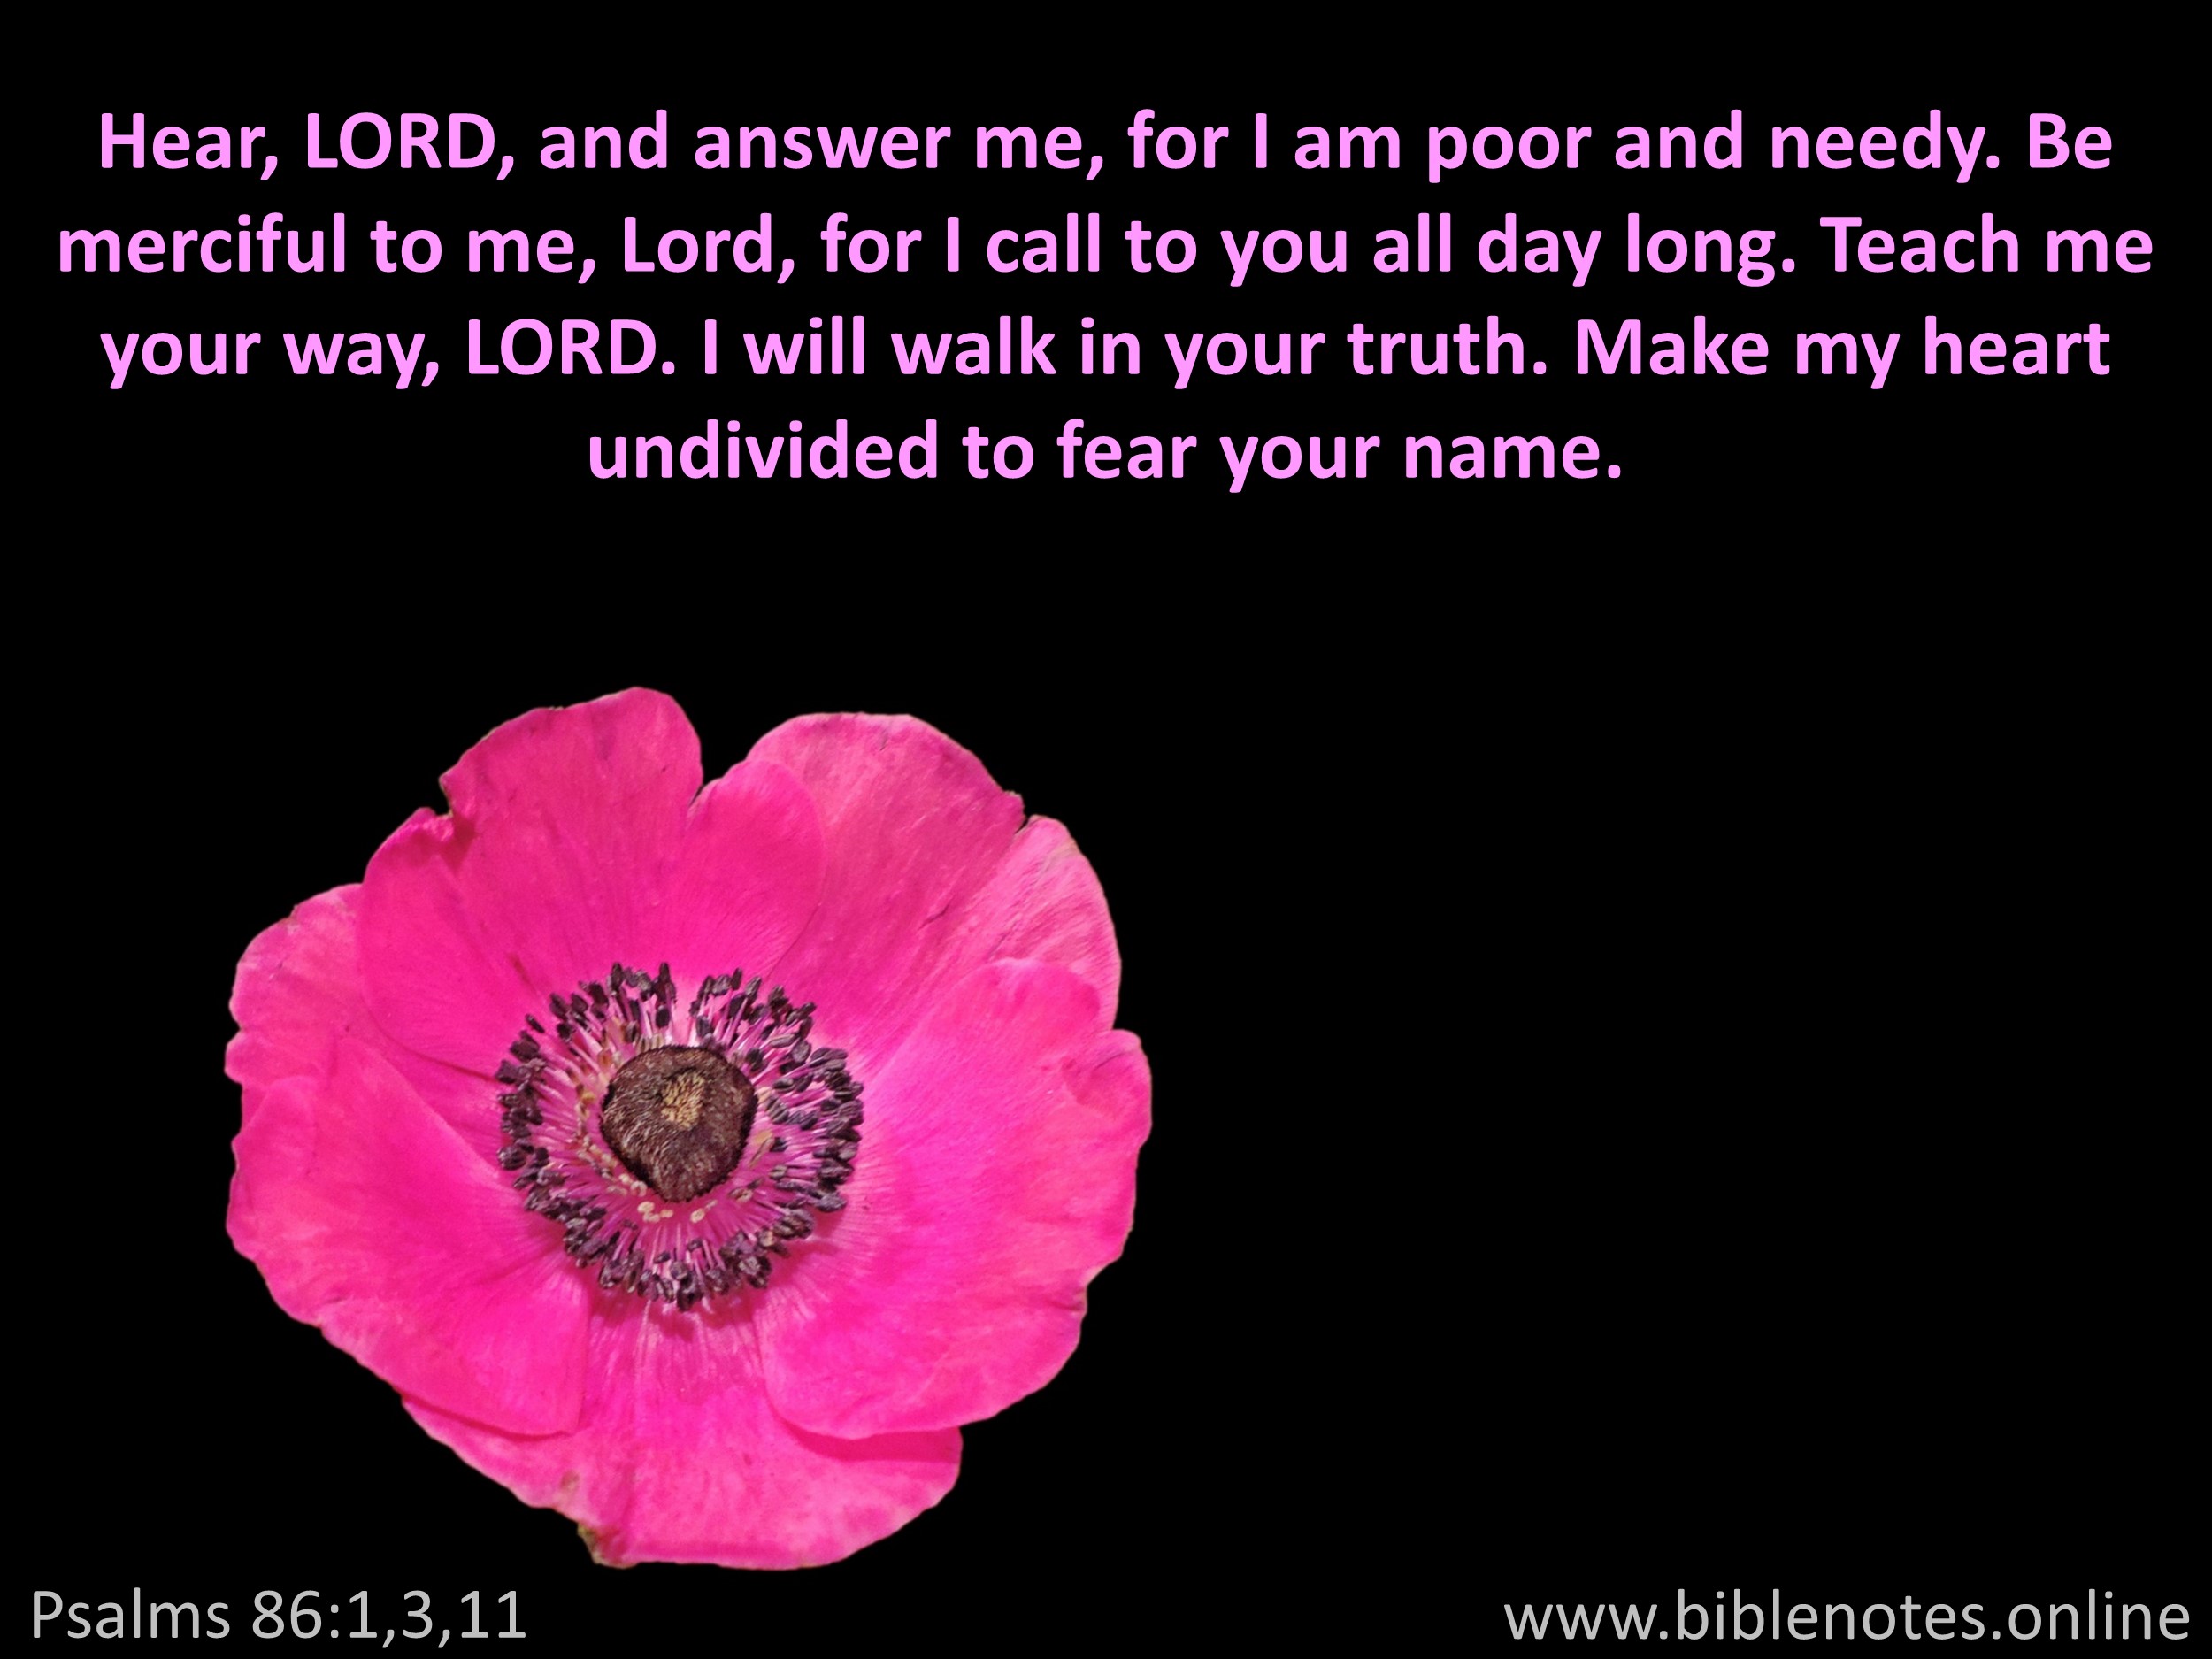 Bible Verse from Psalms Chapter 86